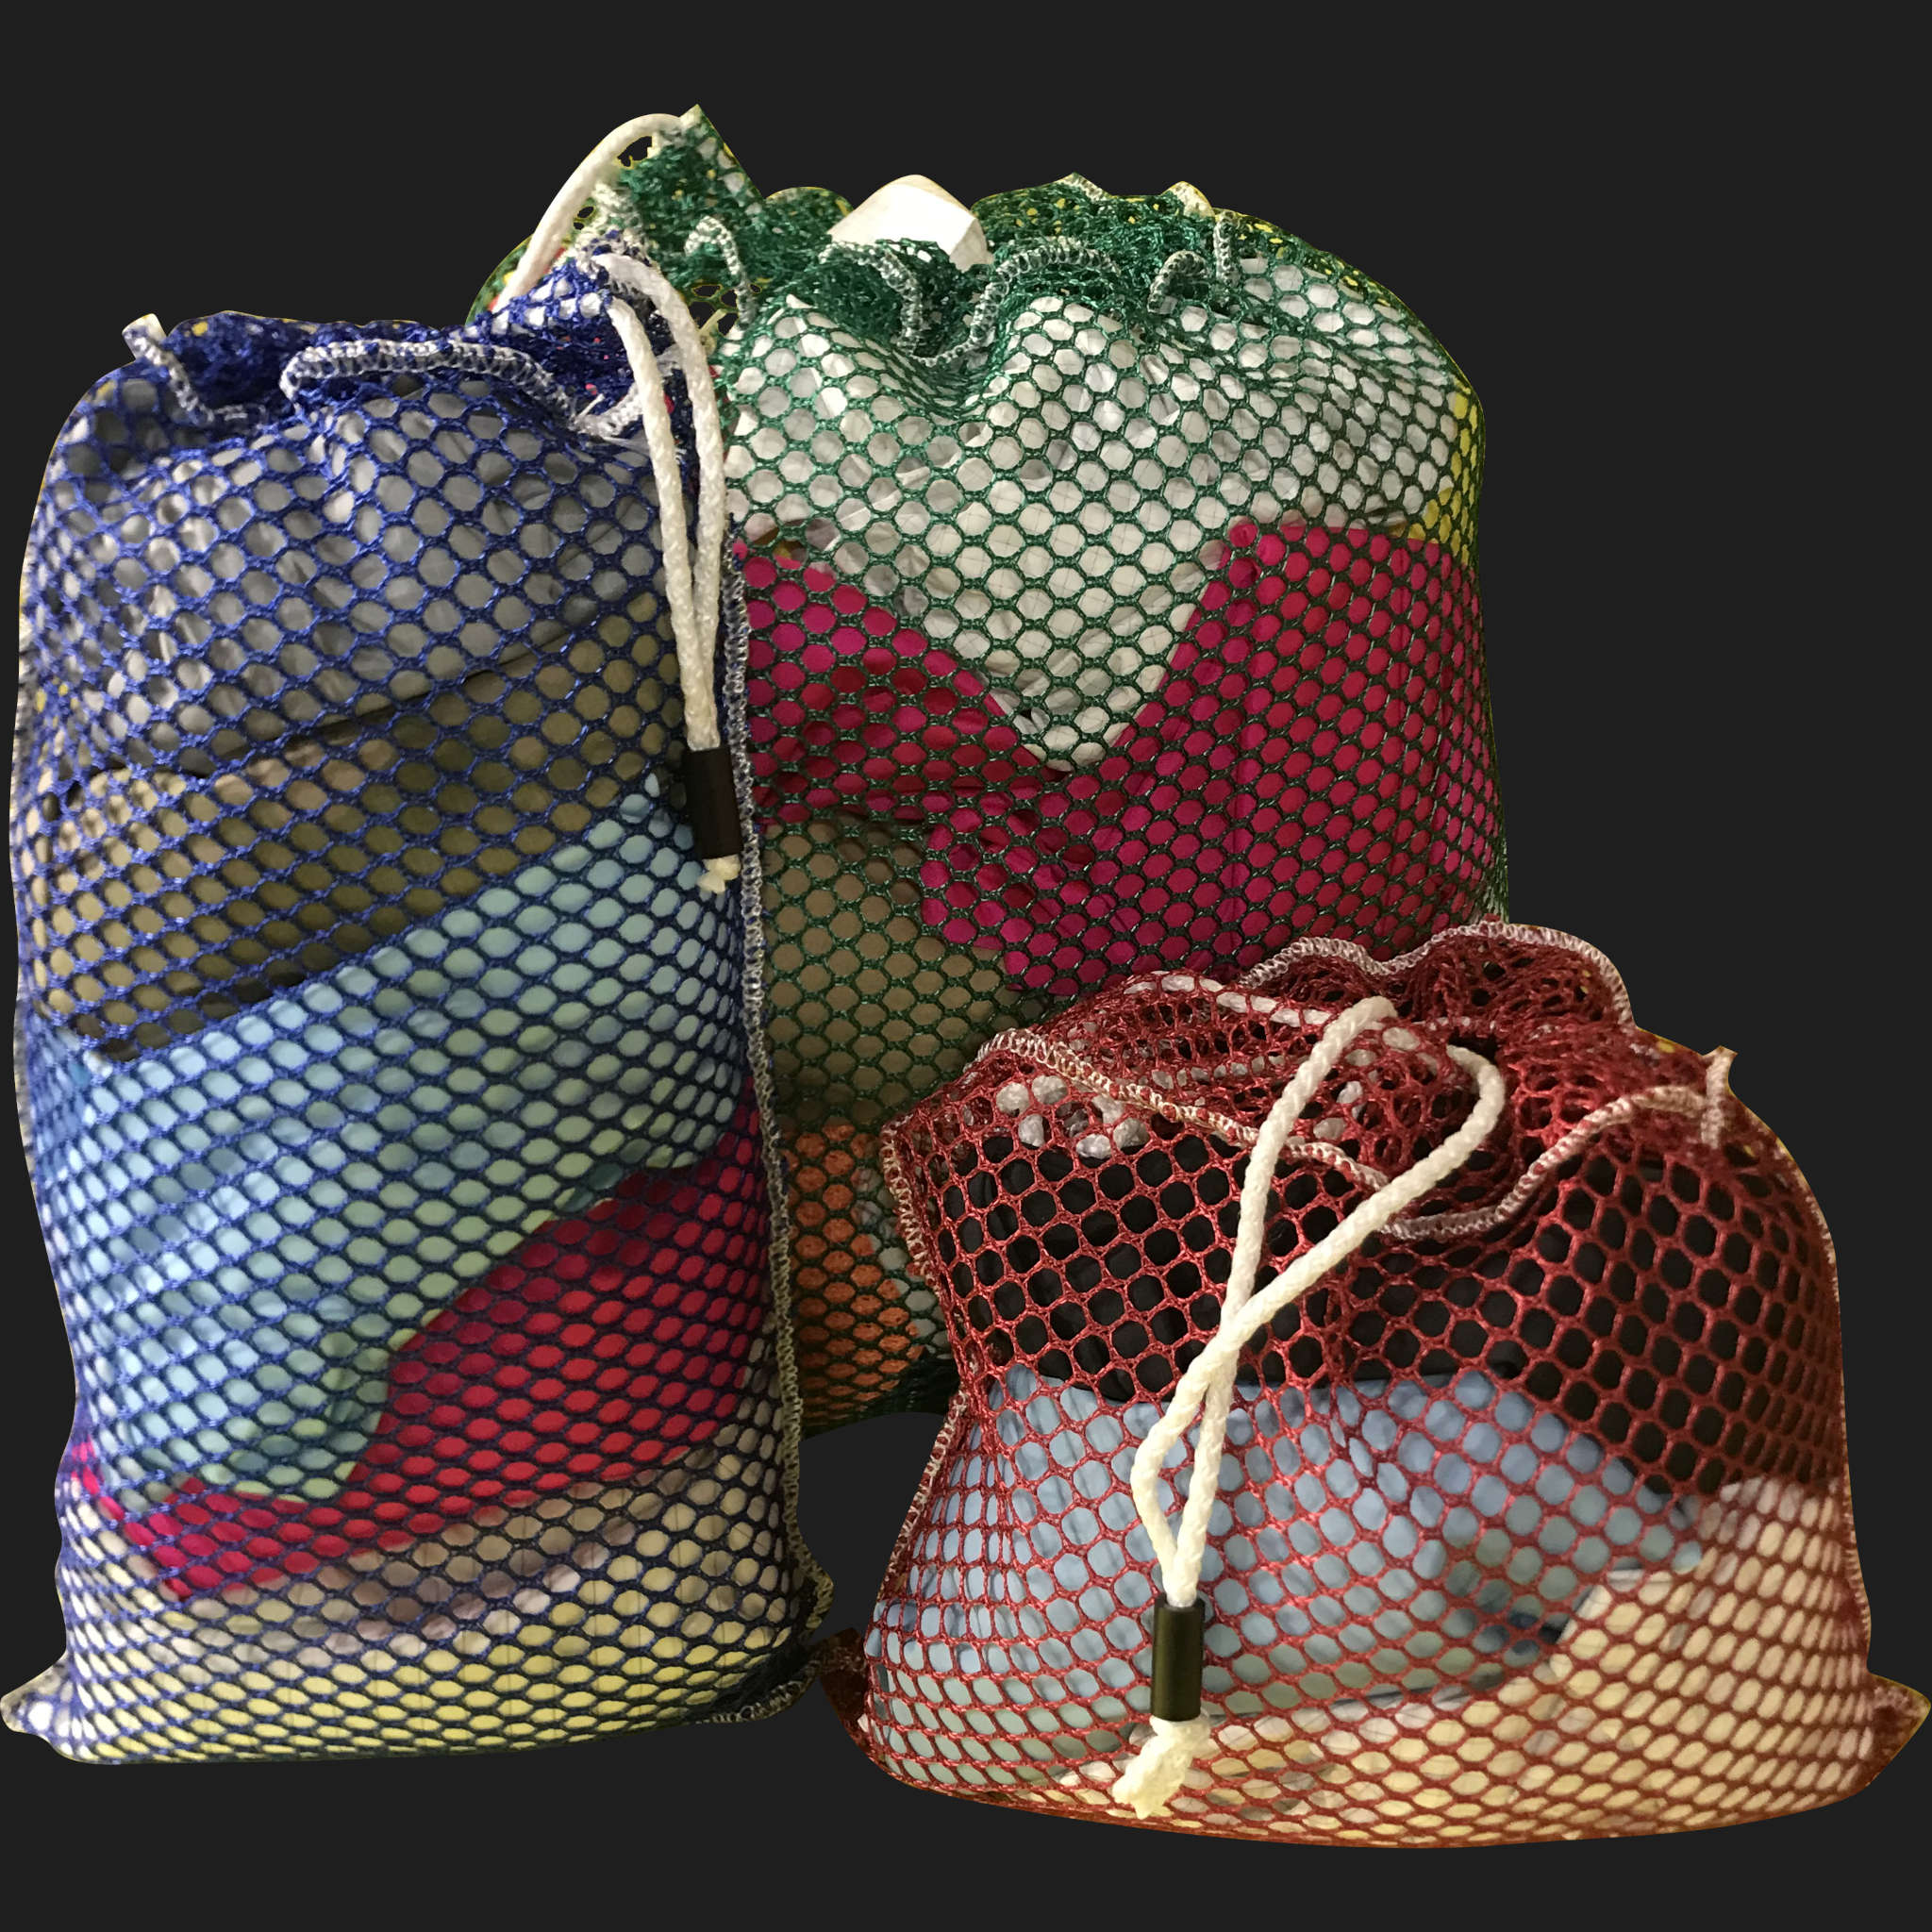 56" x 80" Customized Mesh-Net-Laundry Bags Heavy Duty with Cord and barrellock closure